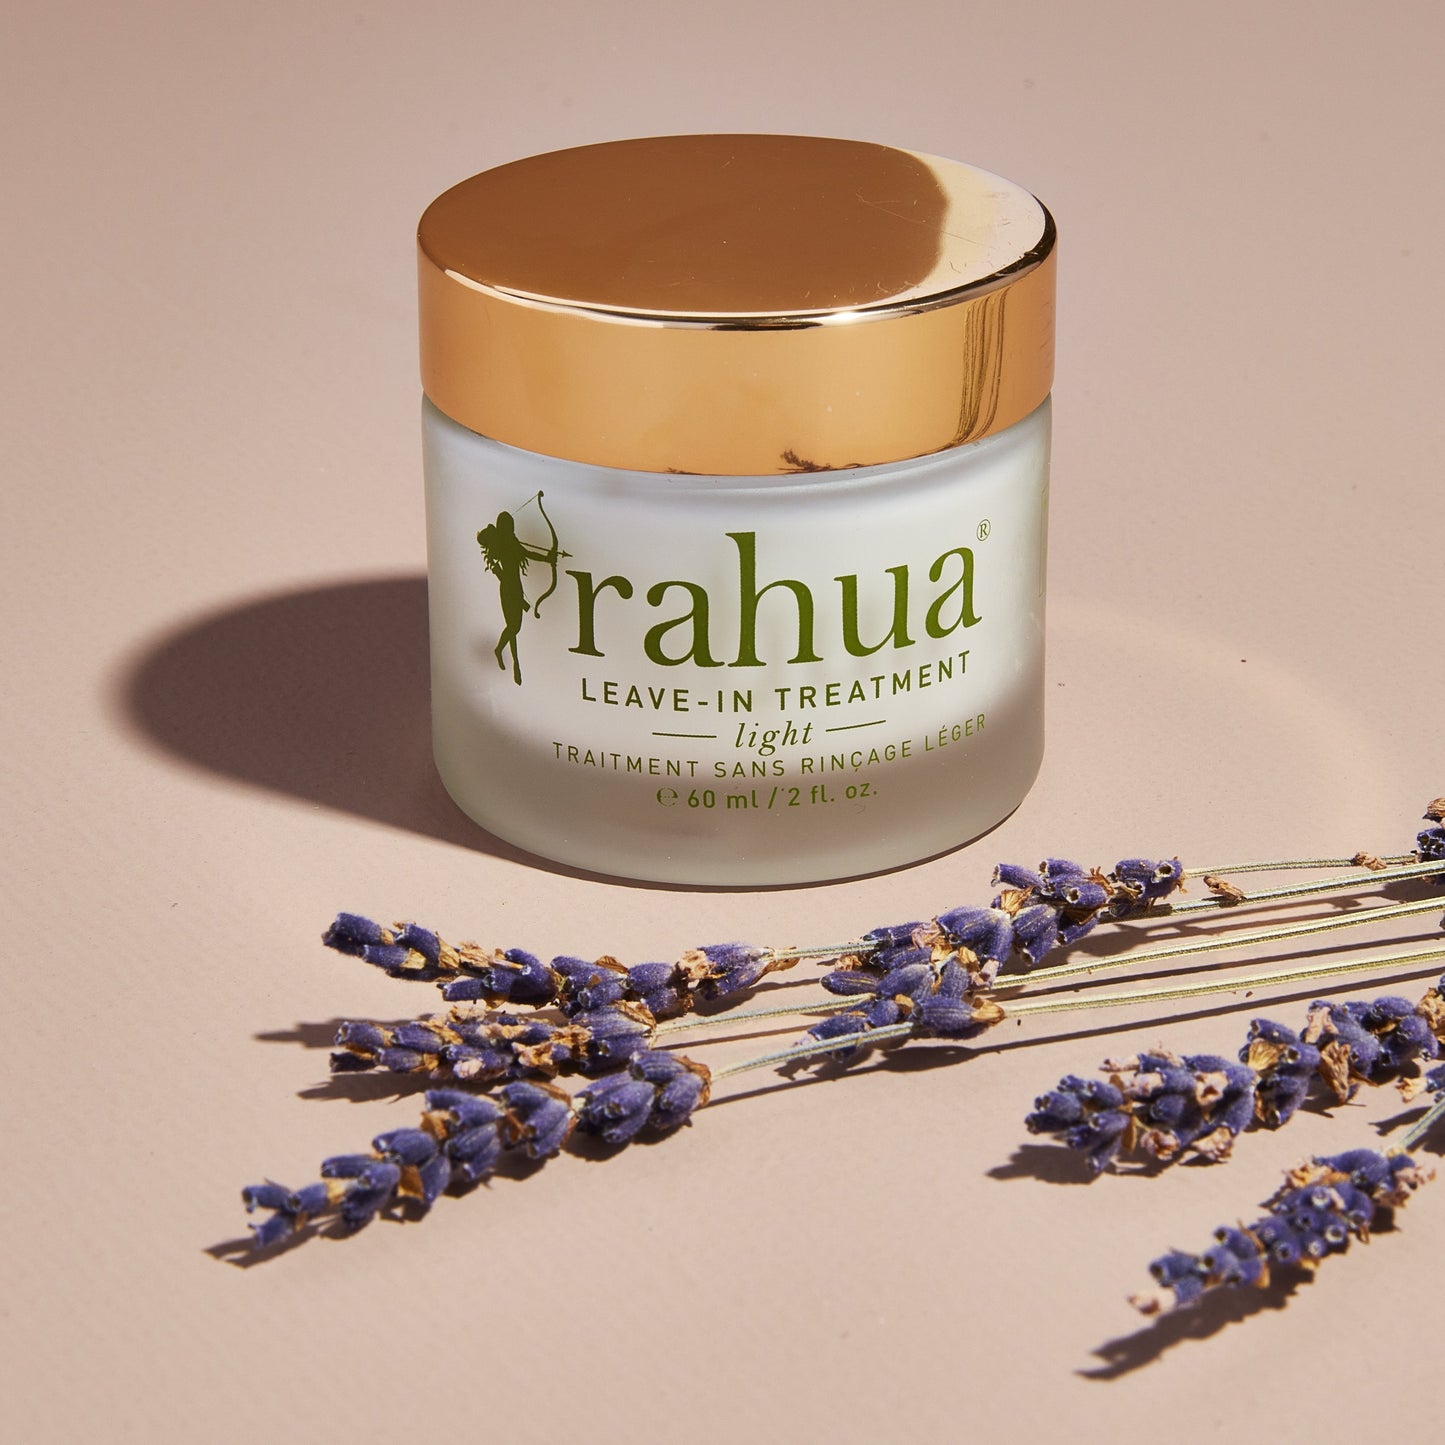 rahua leave in treatment light with some purple plant sticks